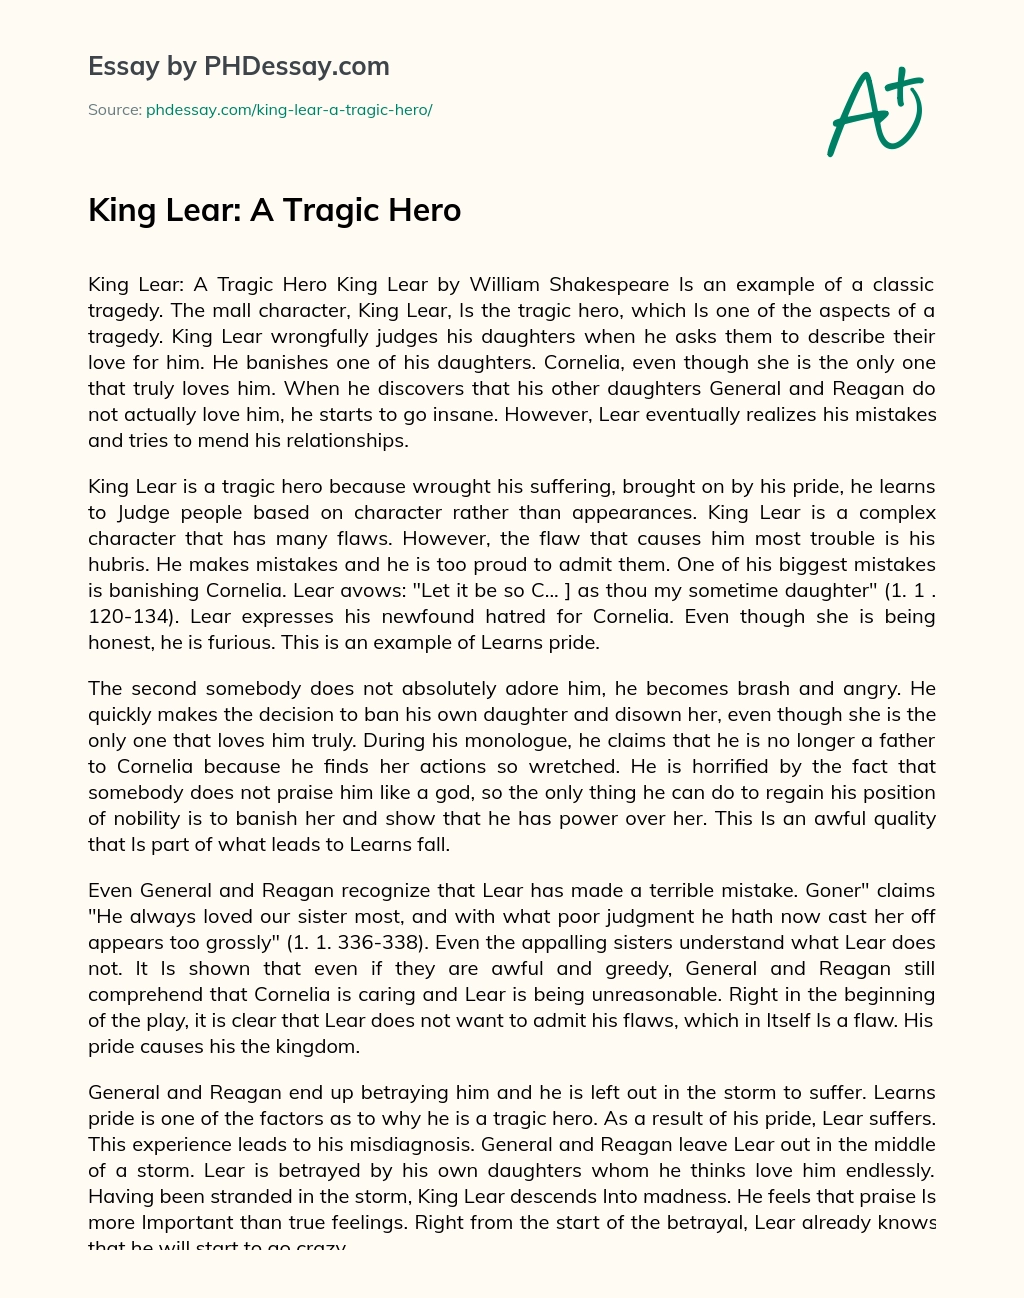 Реферат: Theme Of Blindness In King Lear Essay